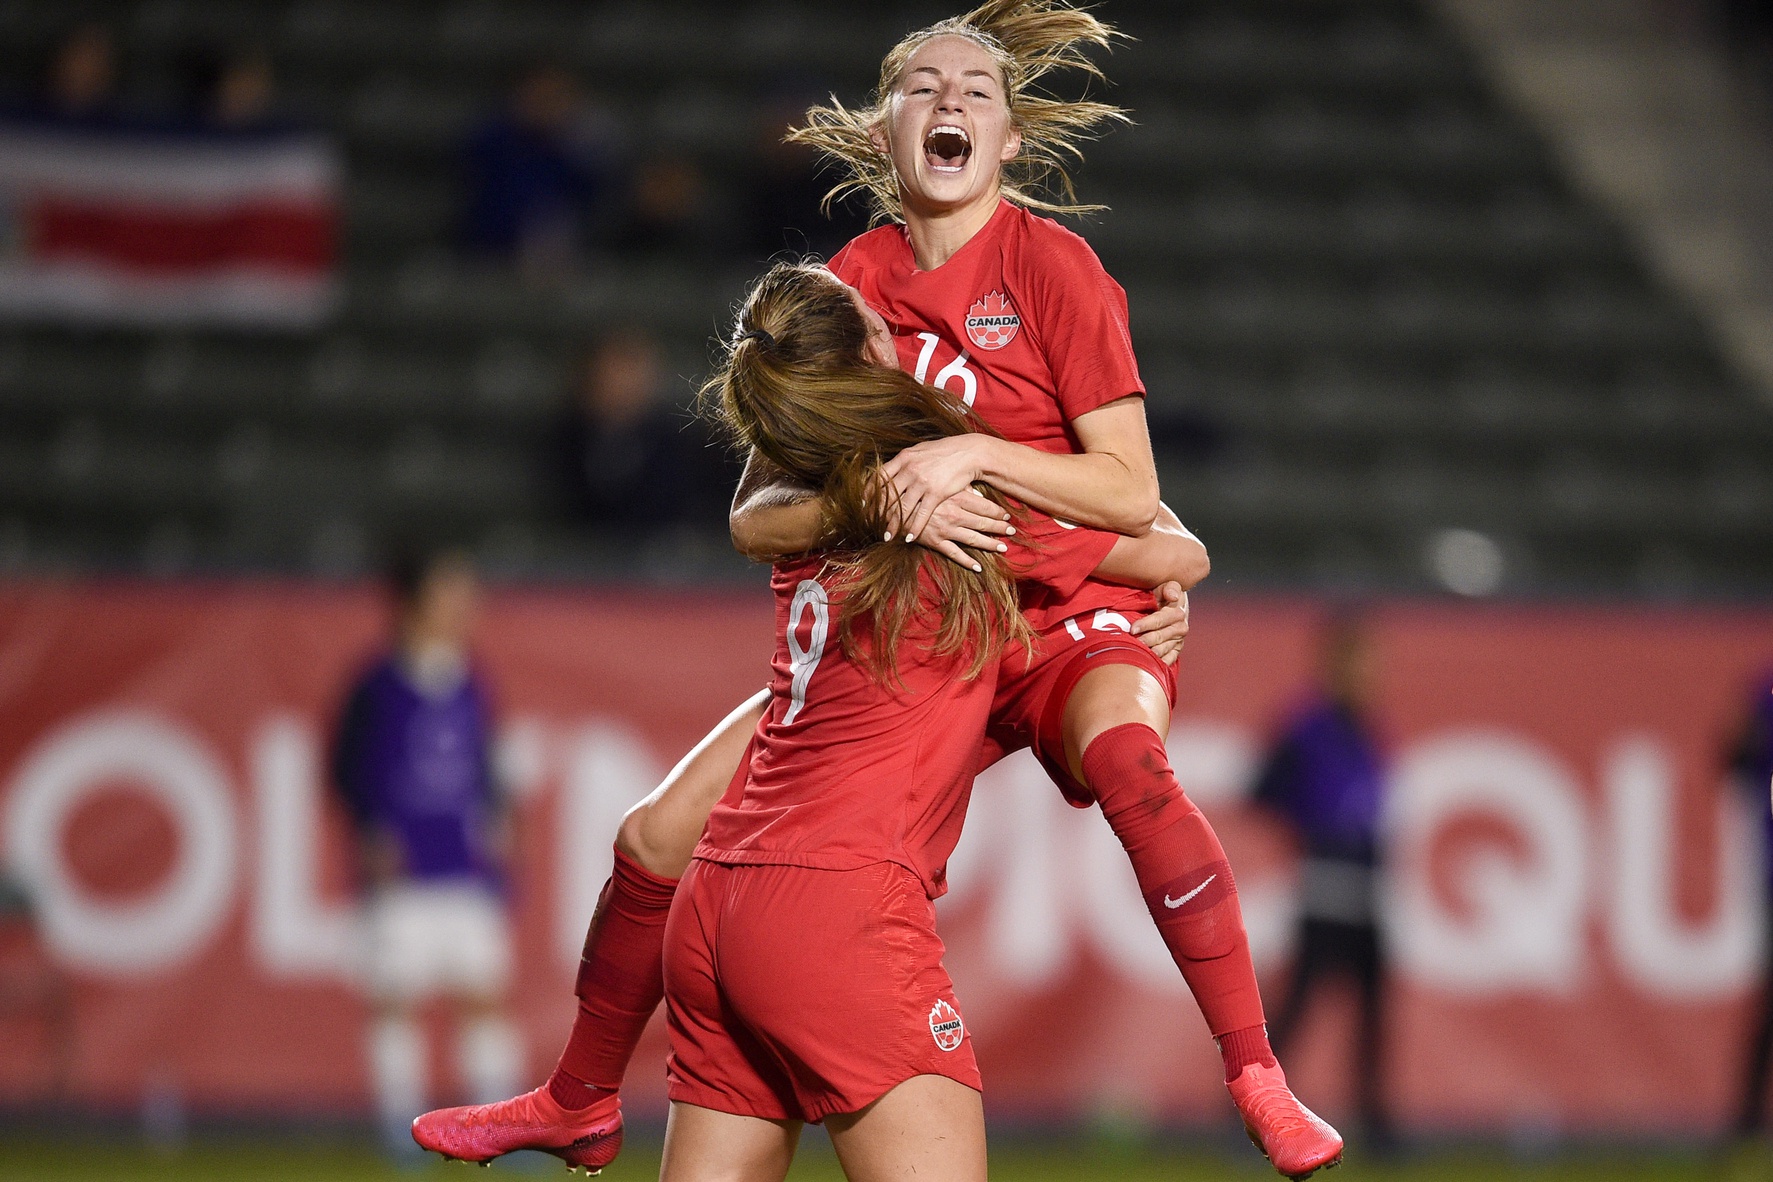 Soccer: CONCACAF Women's Olympic Qualifying-Costa Rica at Canada with Jordyn Huitema Celebrating Goal Against Costa Rica